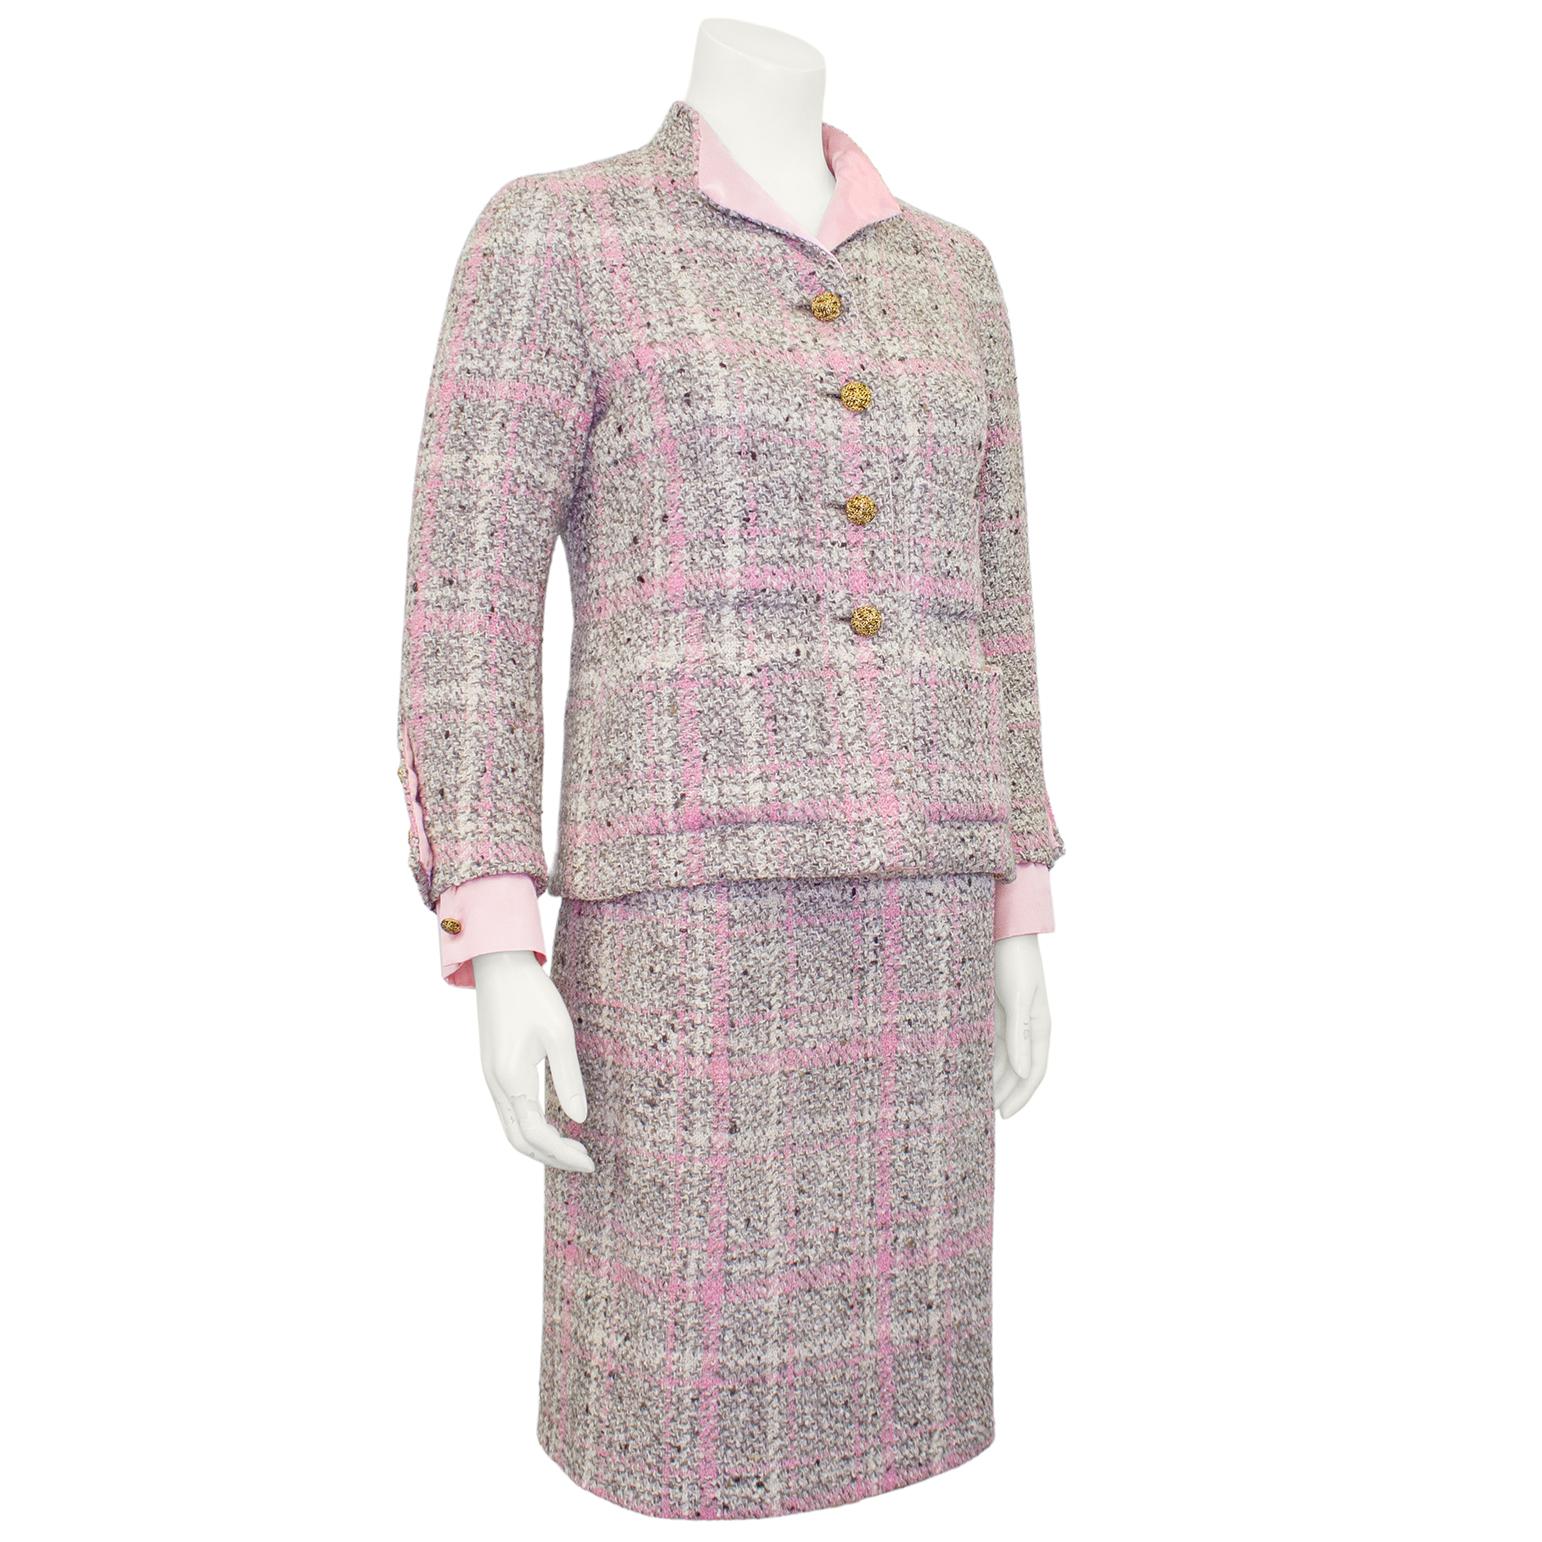 Chanel Haute Couture suit from the 1960s. Both the jacket and the skirt and crafted from a brownish grey wool tweed with a pink and white all over plaid. The jacket is lined in pale pink silk that is revealed at the wing collar and the cuffs. Four